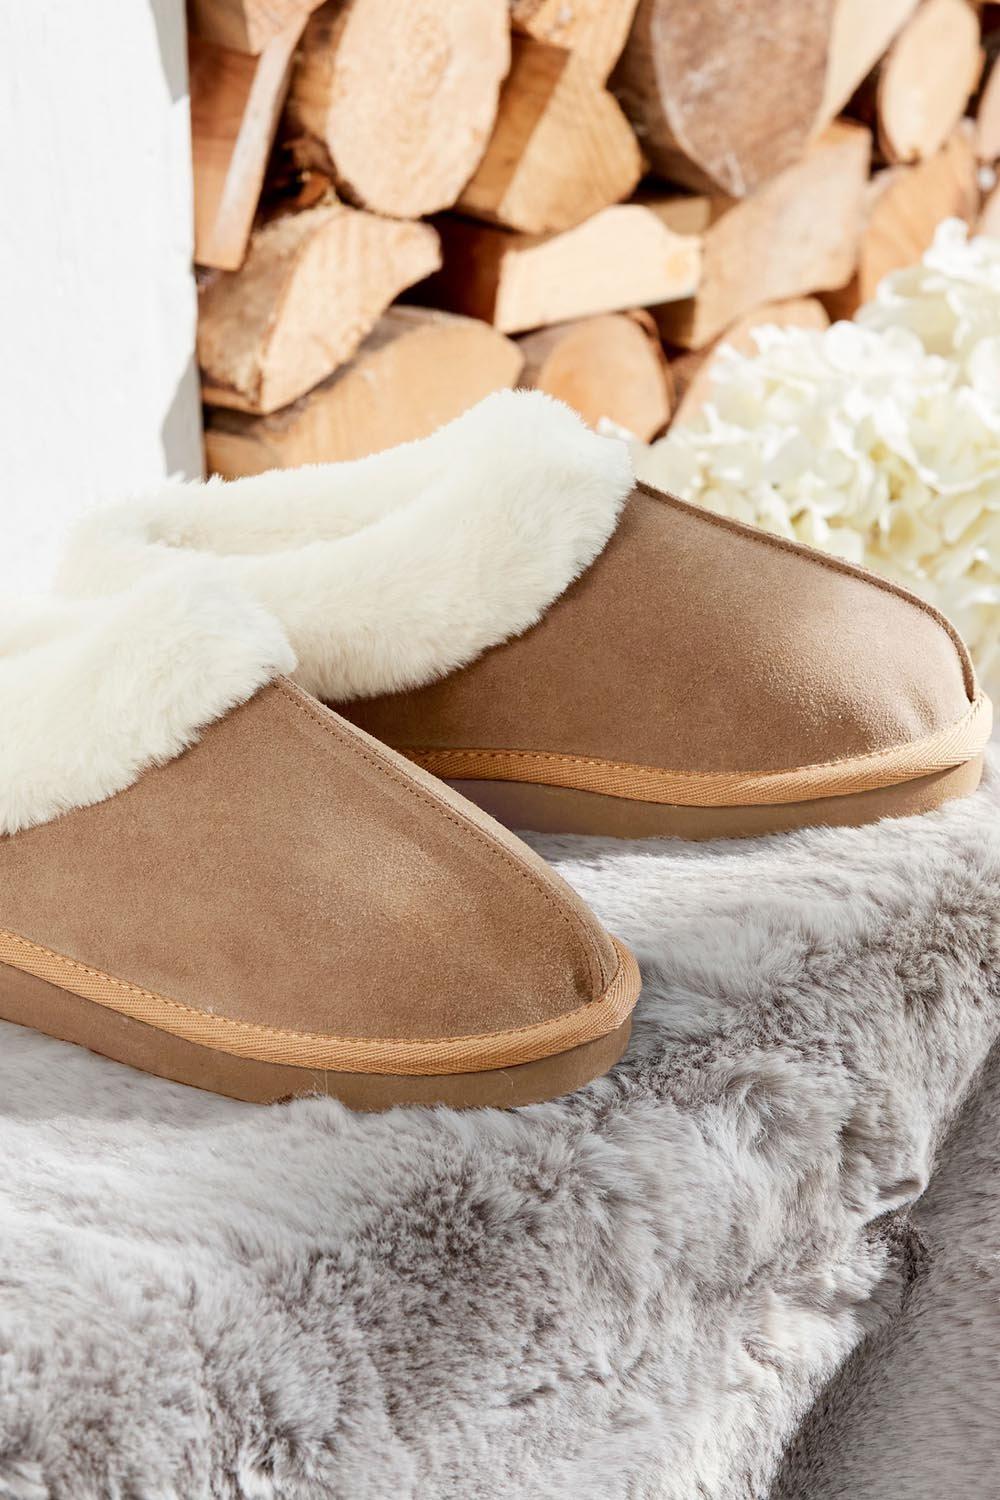 Suede Plush Lined Bootie Slippers